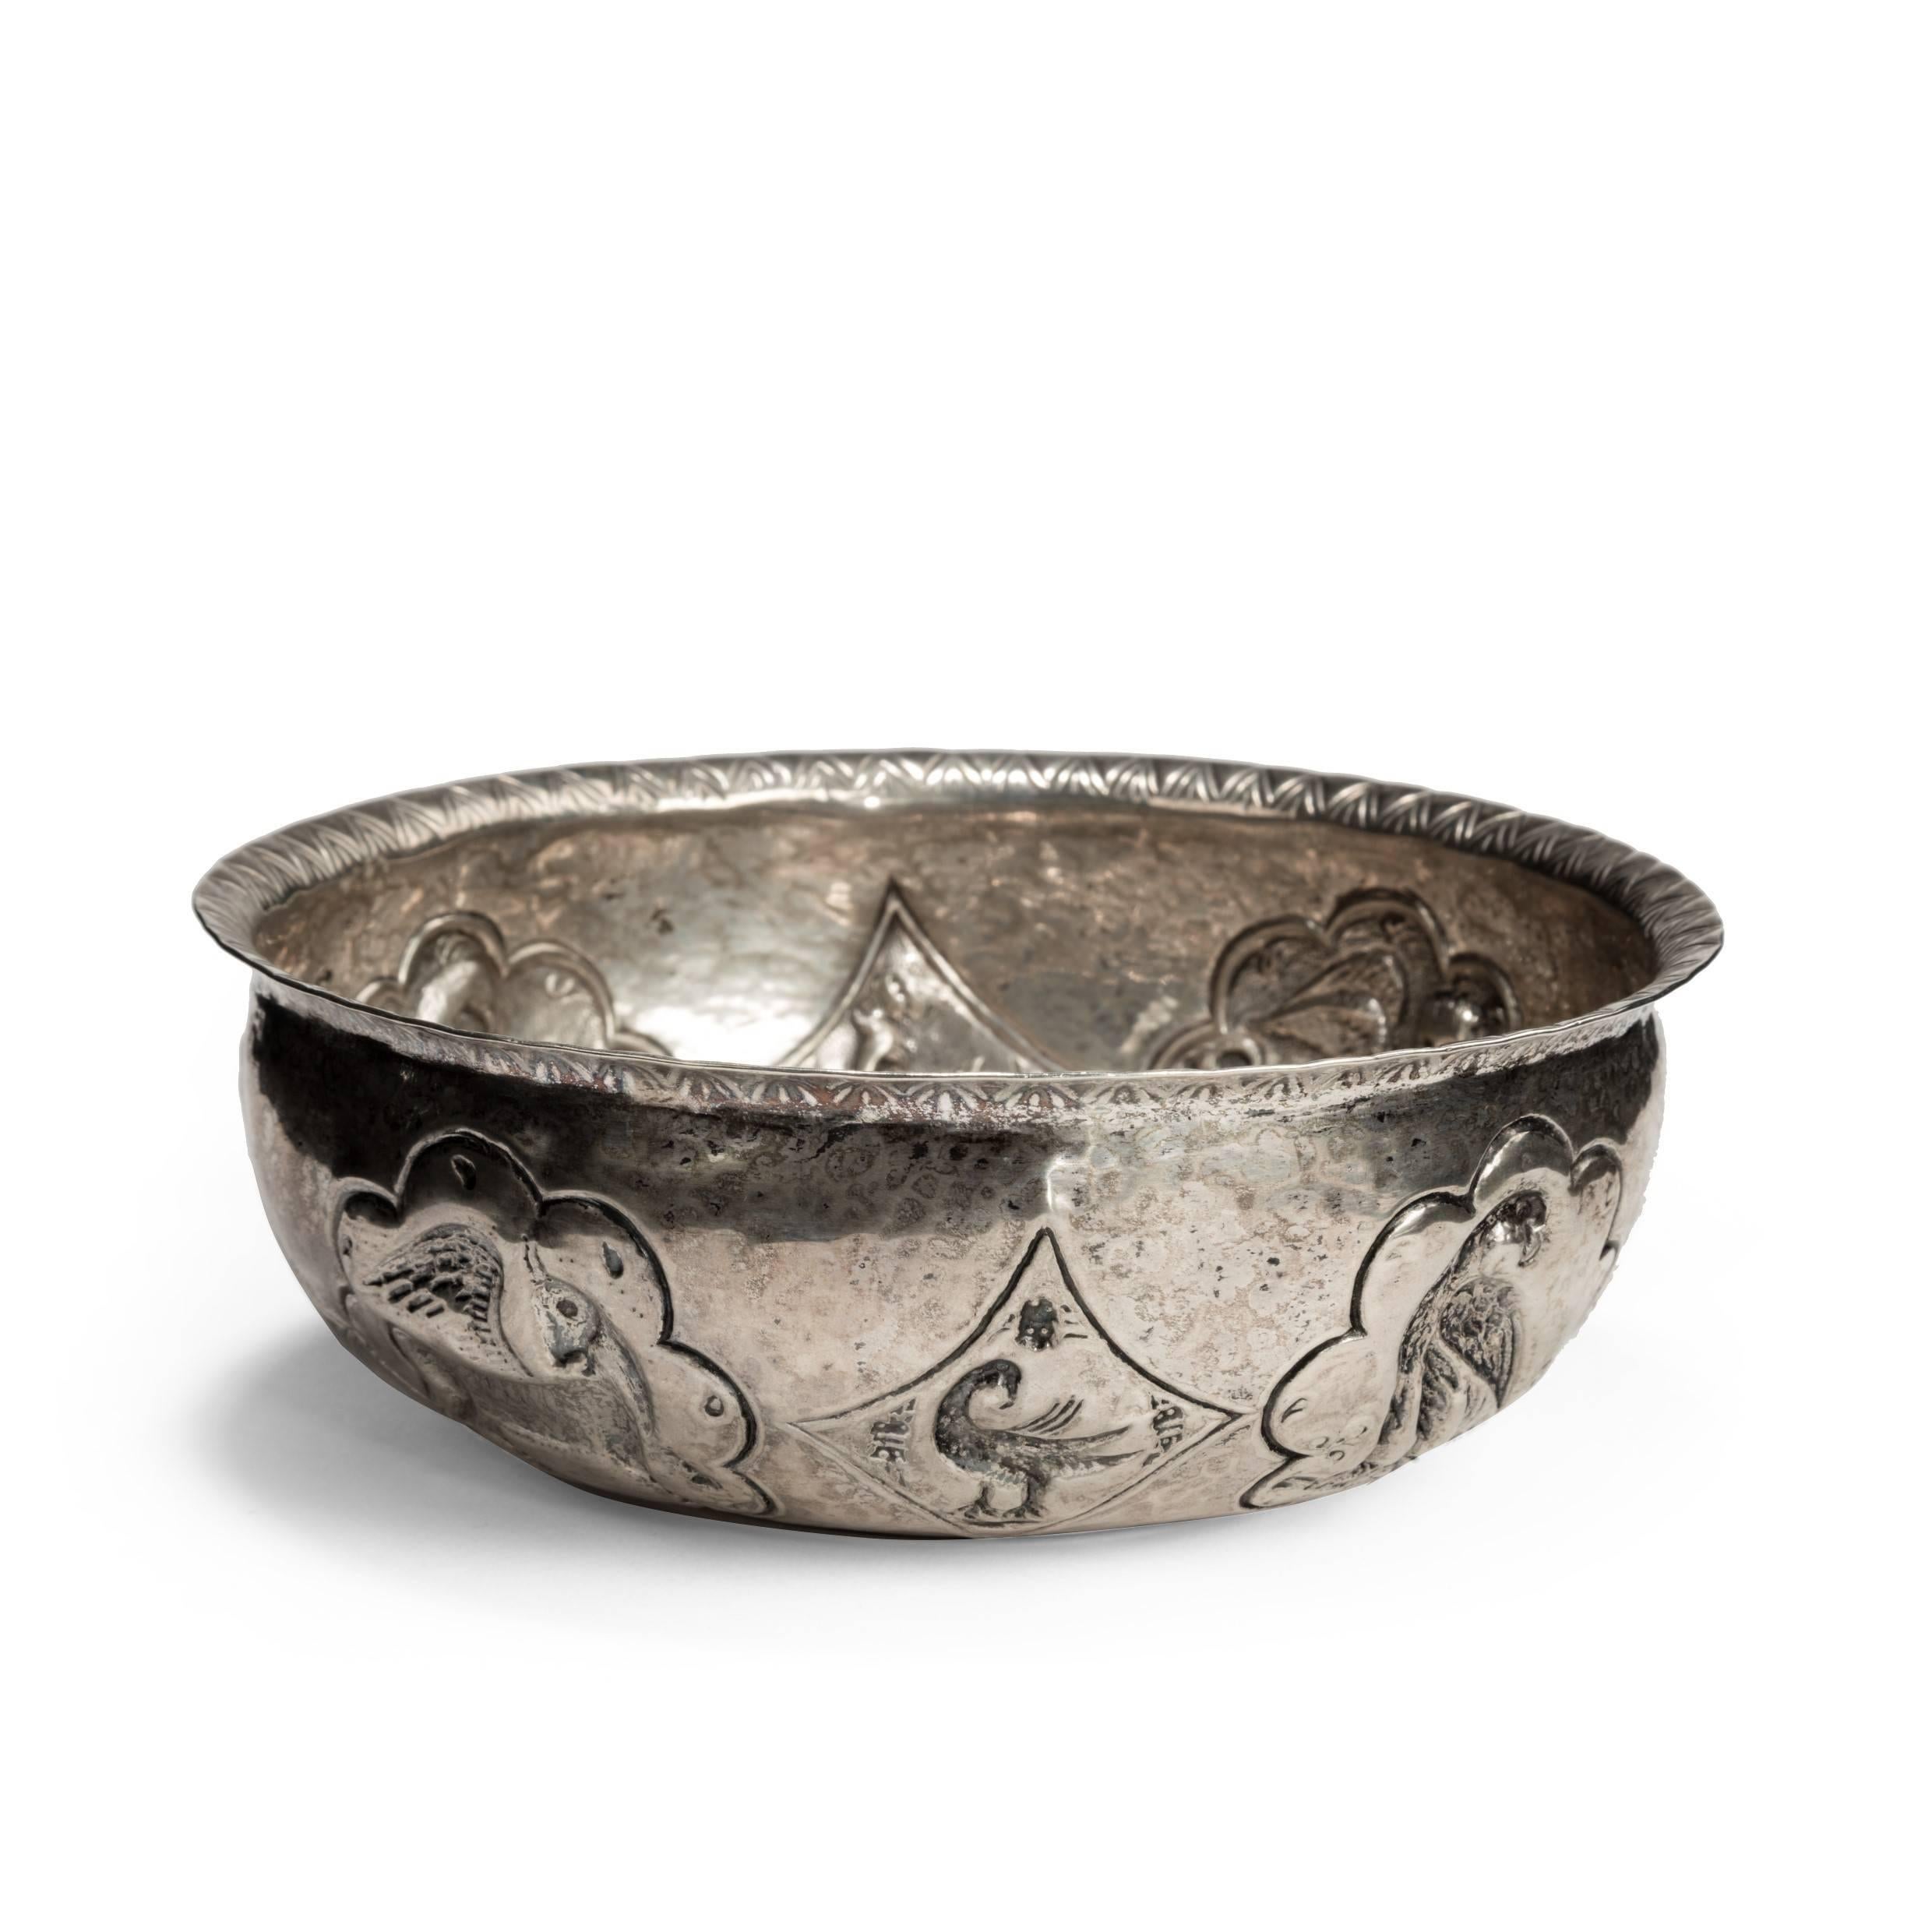 A rare antique Balkan silver-gilt bowl with repousse decoration round the curvetto of alternate lobed and diamond cartouches enclosing mythical beasts and birds, including the winged lion of St Mark, the central boss with a double cruciform design